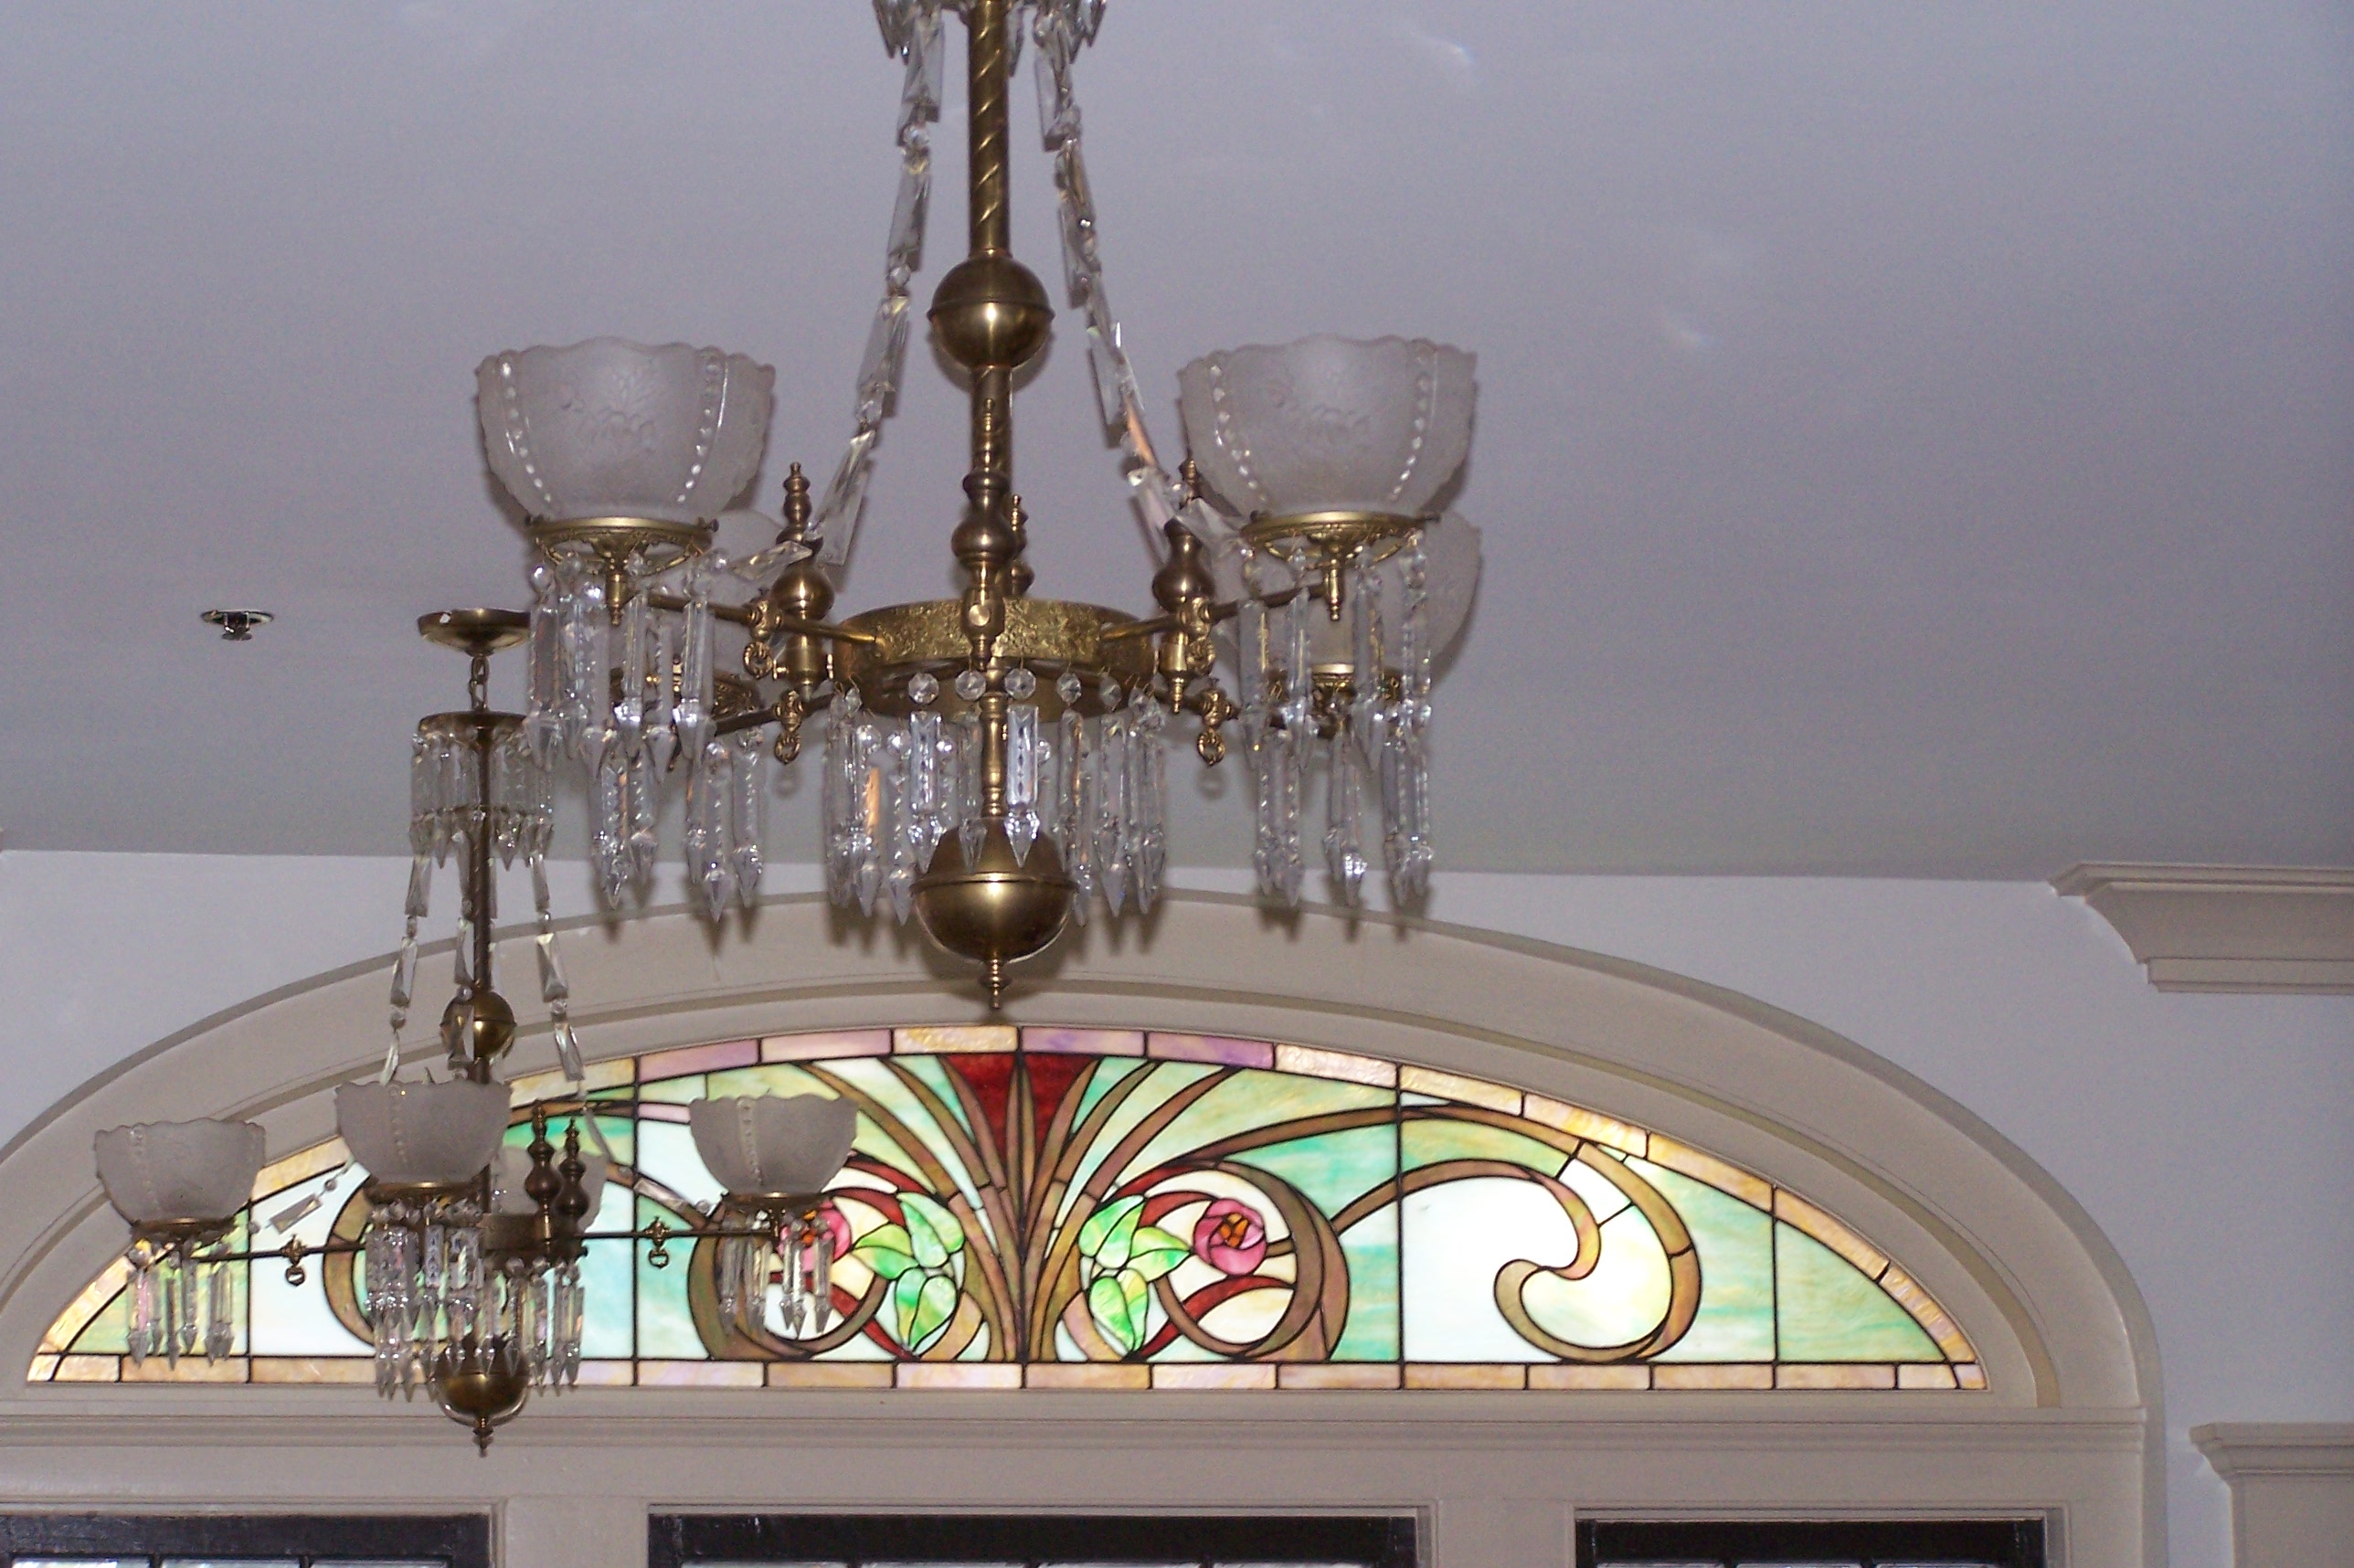 close up of chandelier by entrance